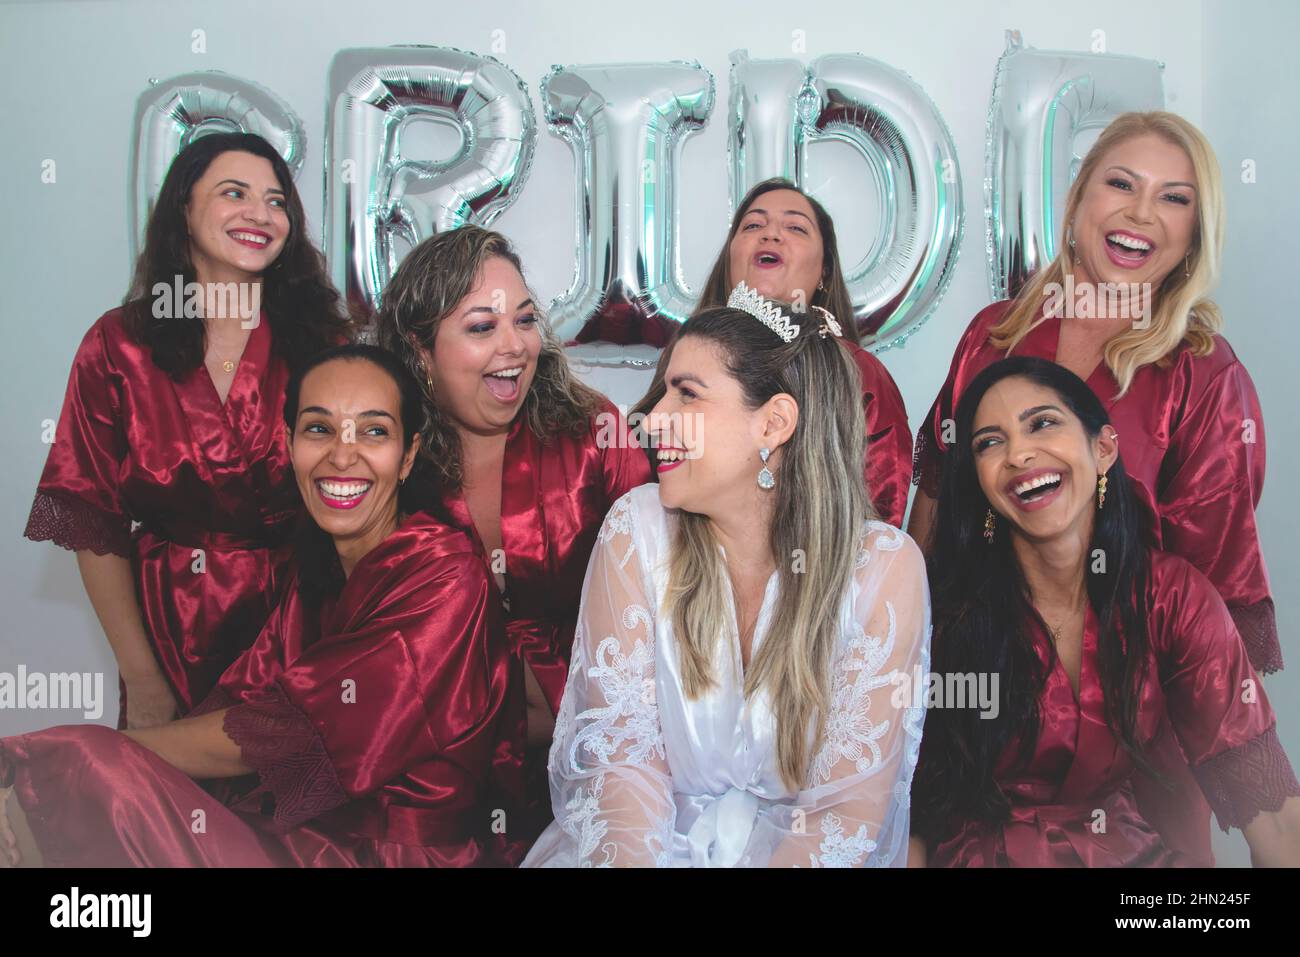 Bride and bridesmaids together in portrait against white background written Bride. Salvador, Bahia, Brazil. Stock Photo